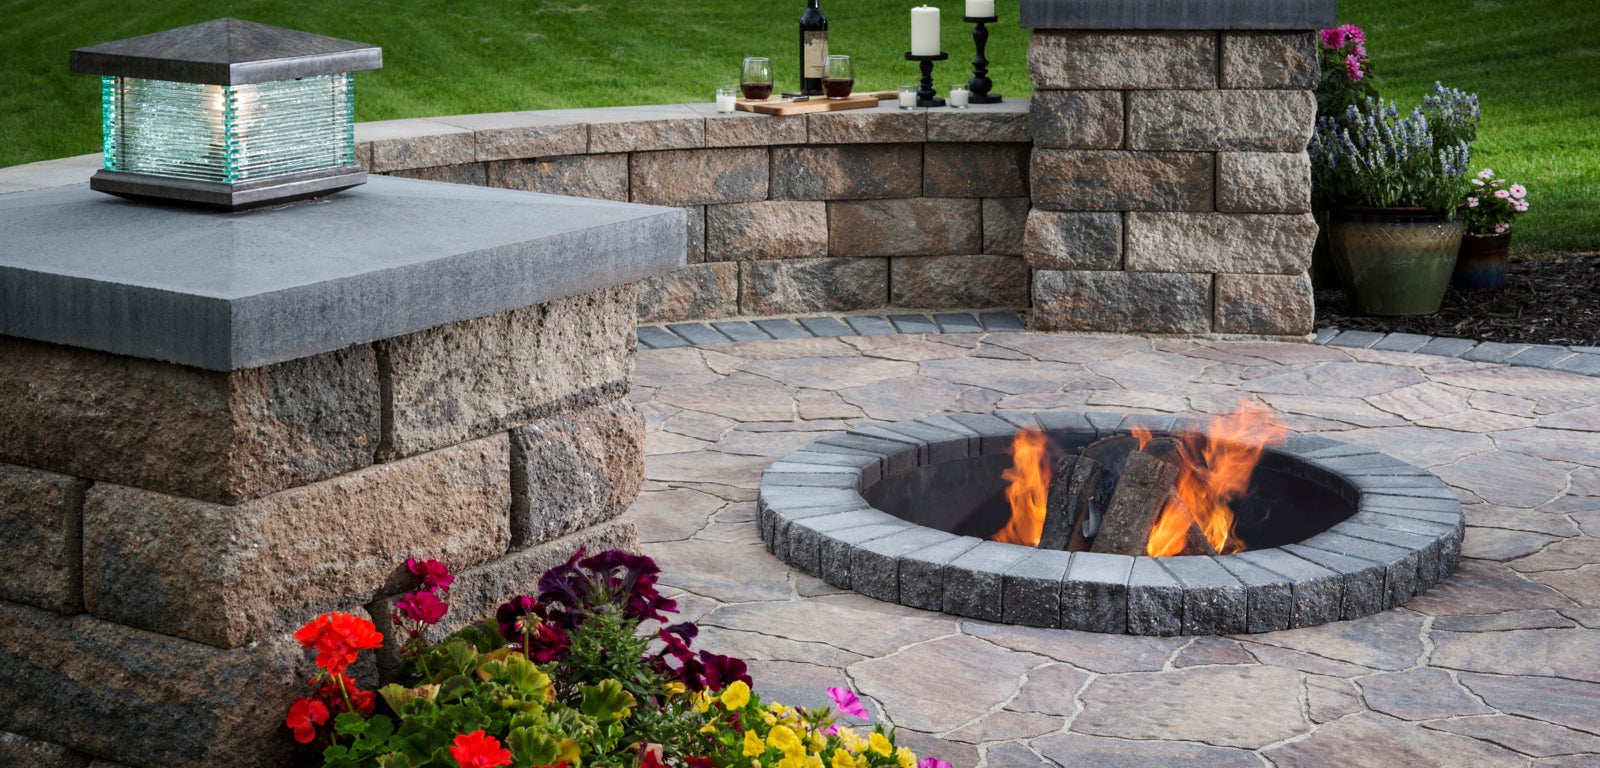 An outdoor stone patio with a fire pit, decorative plants, and a bottle of wine with glasses.